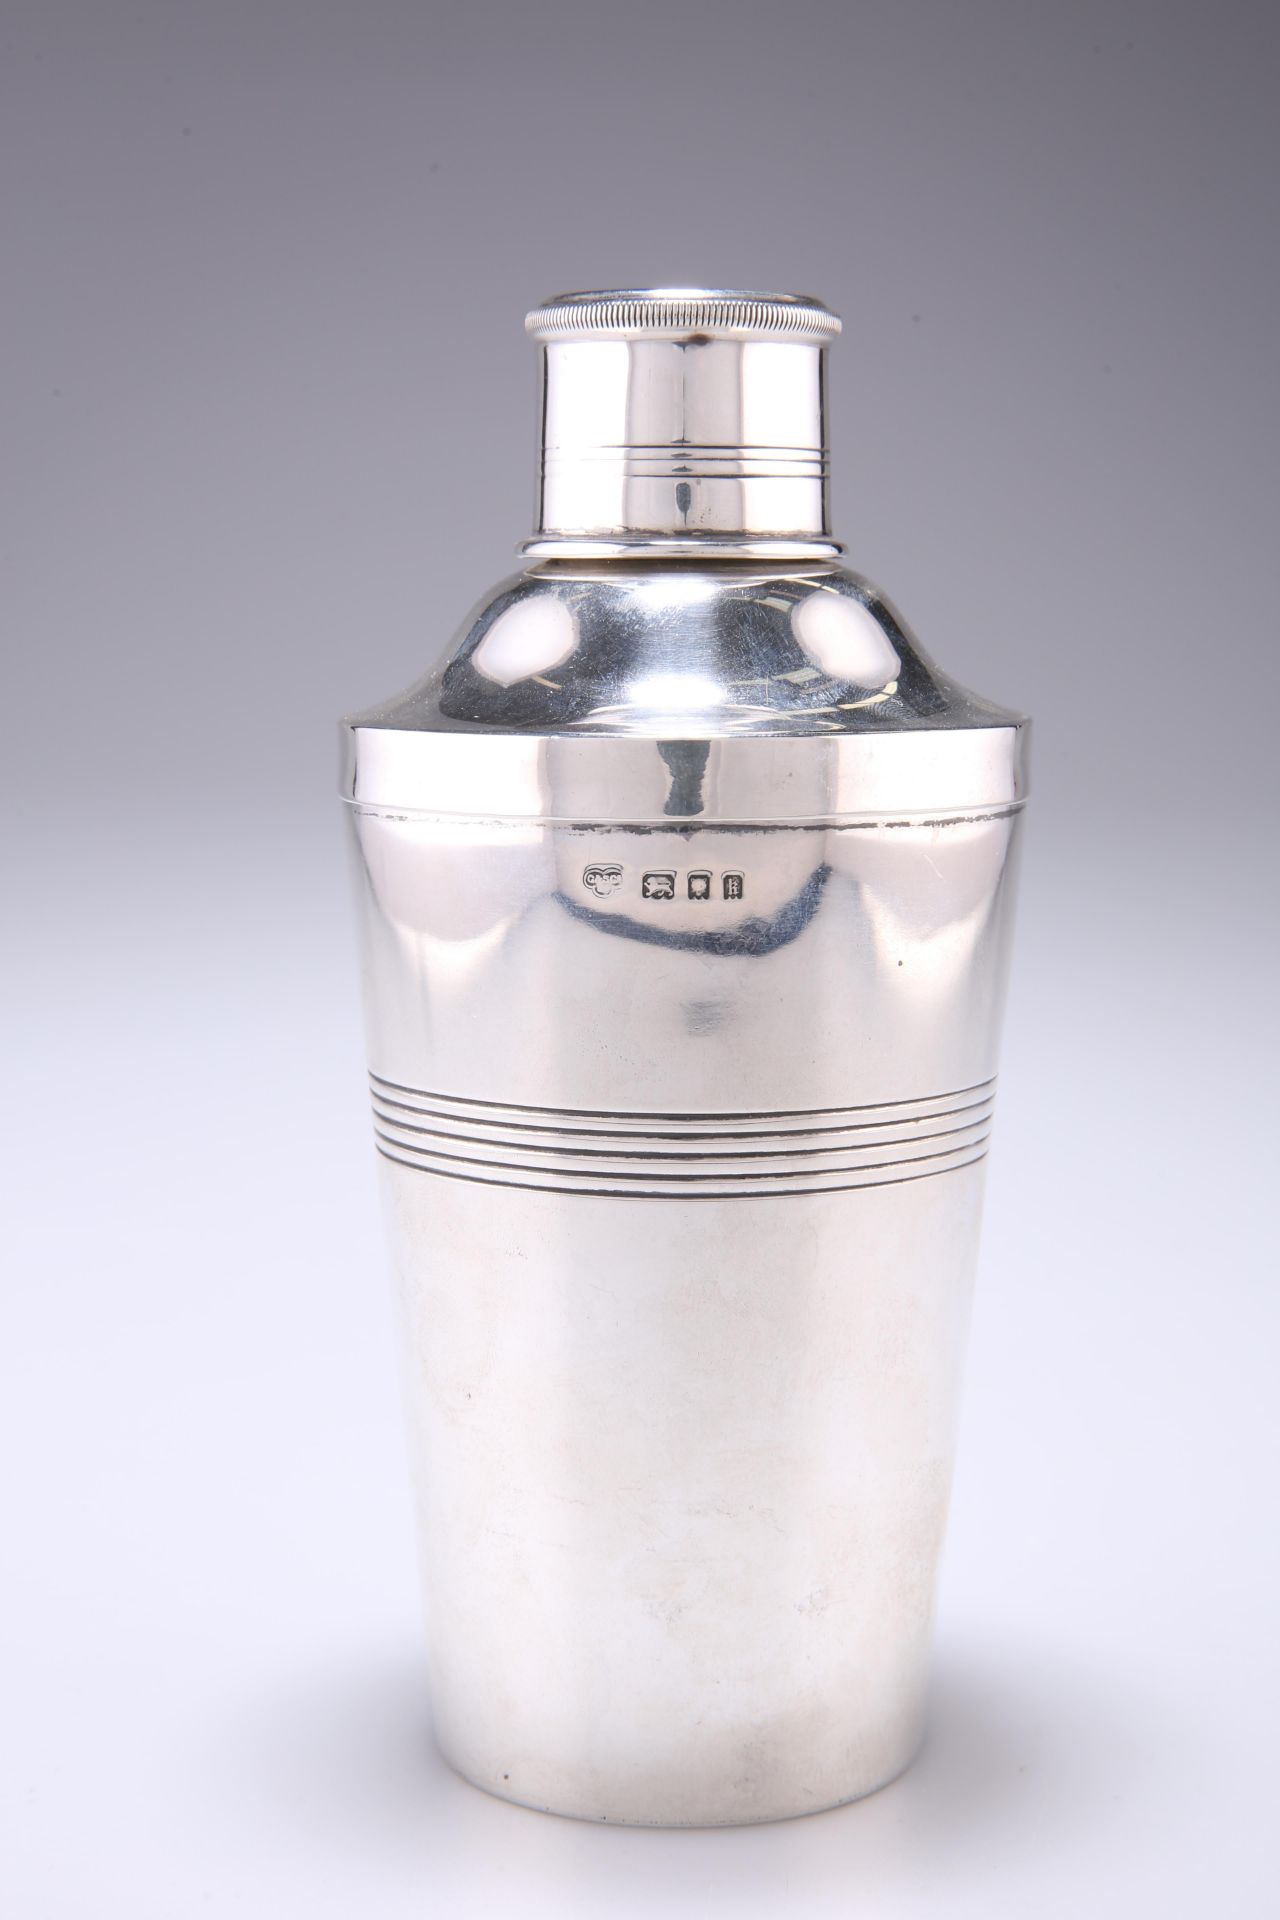 AN ART DECO COCKTAIL SHAKER, by Goldsmiths & Silversmiths Co. Ltd, London 1925, of tapering